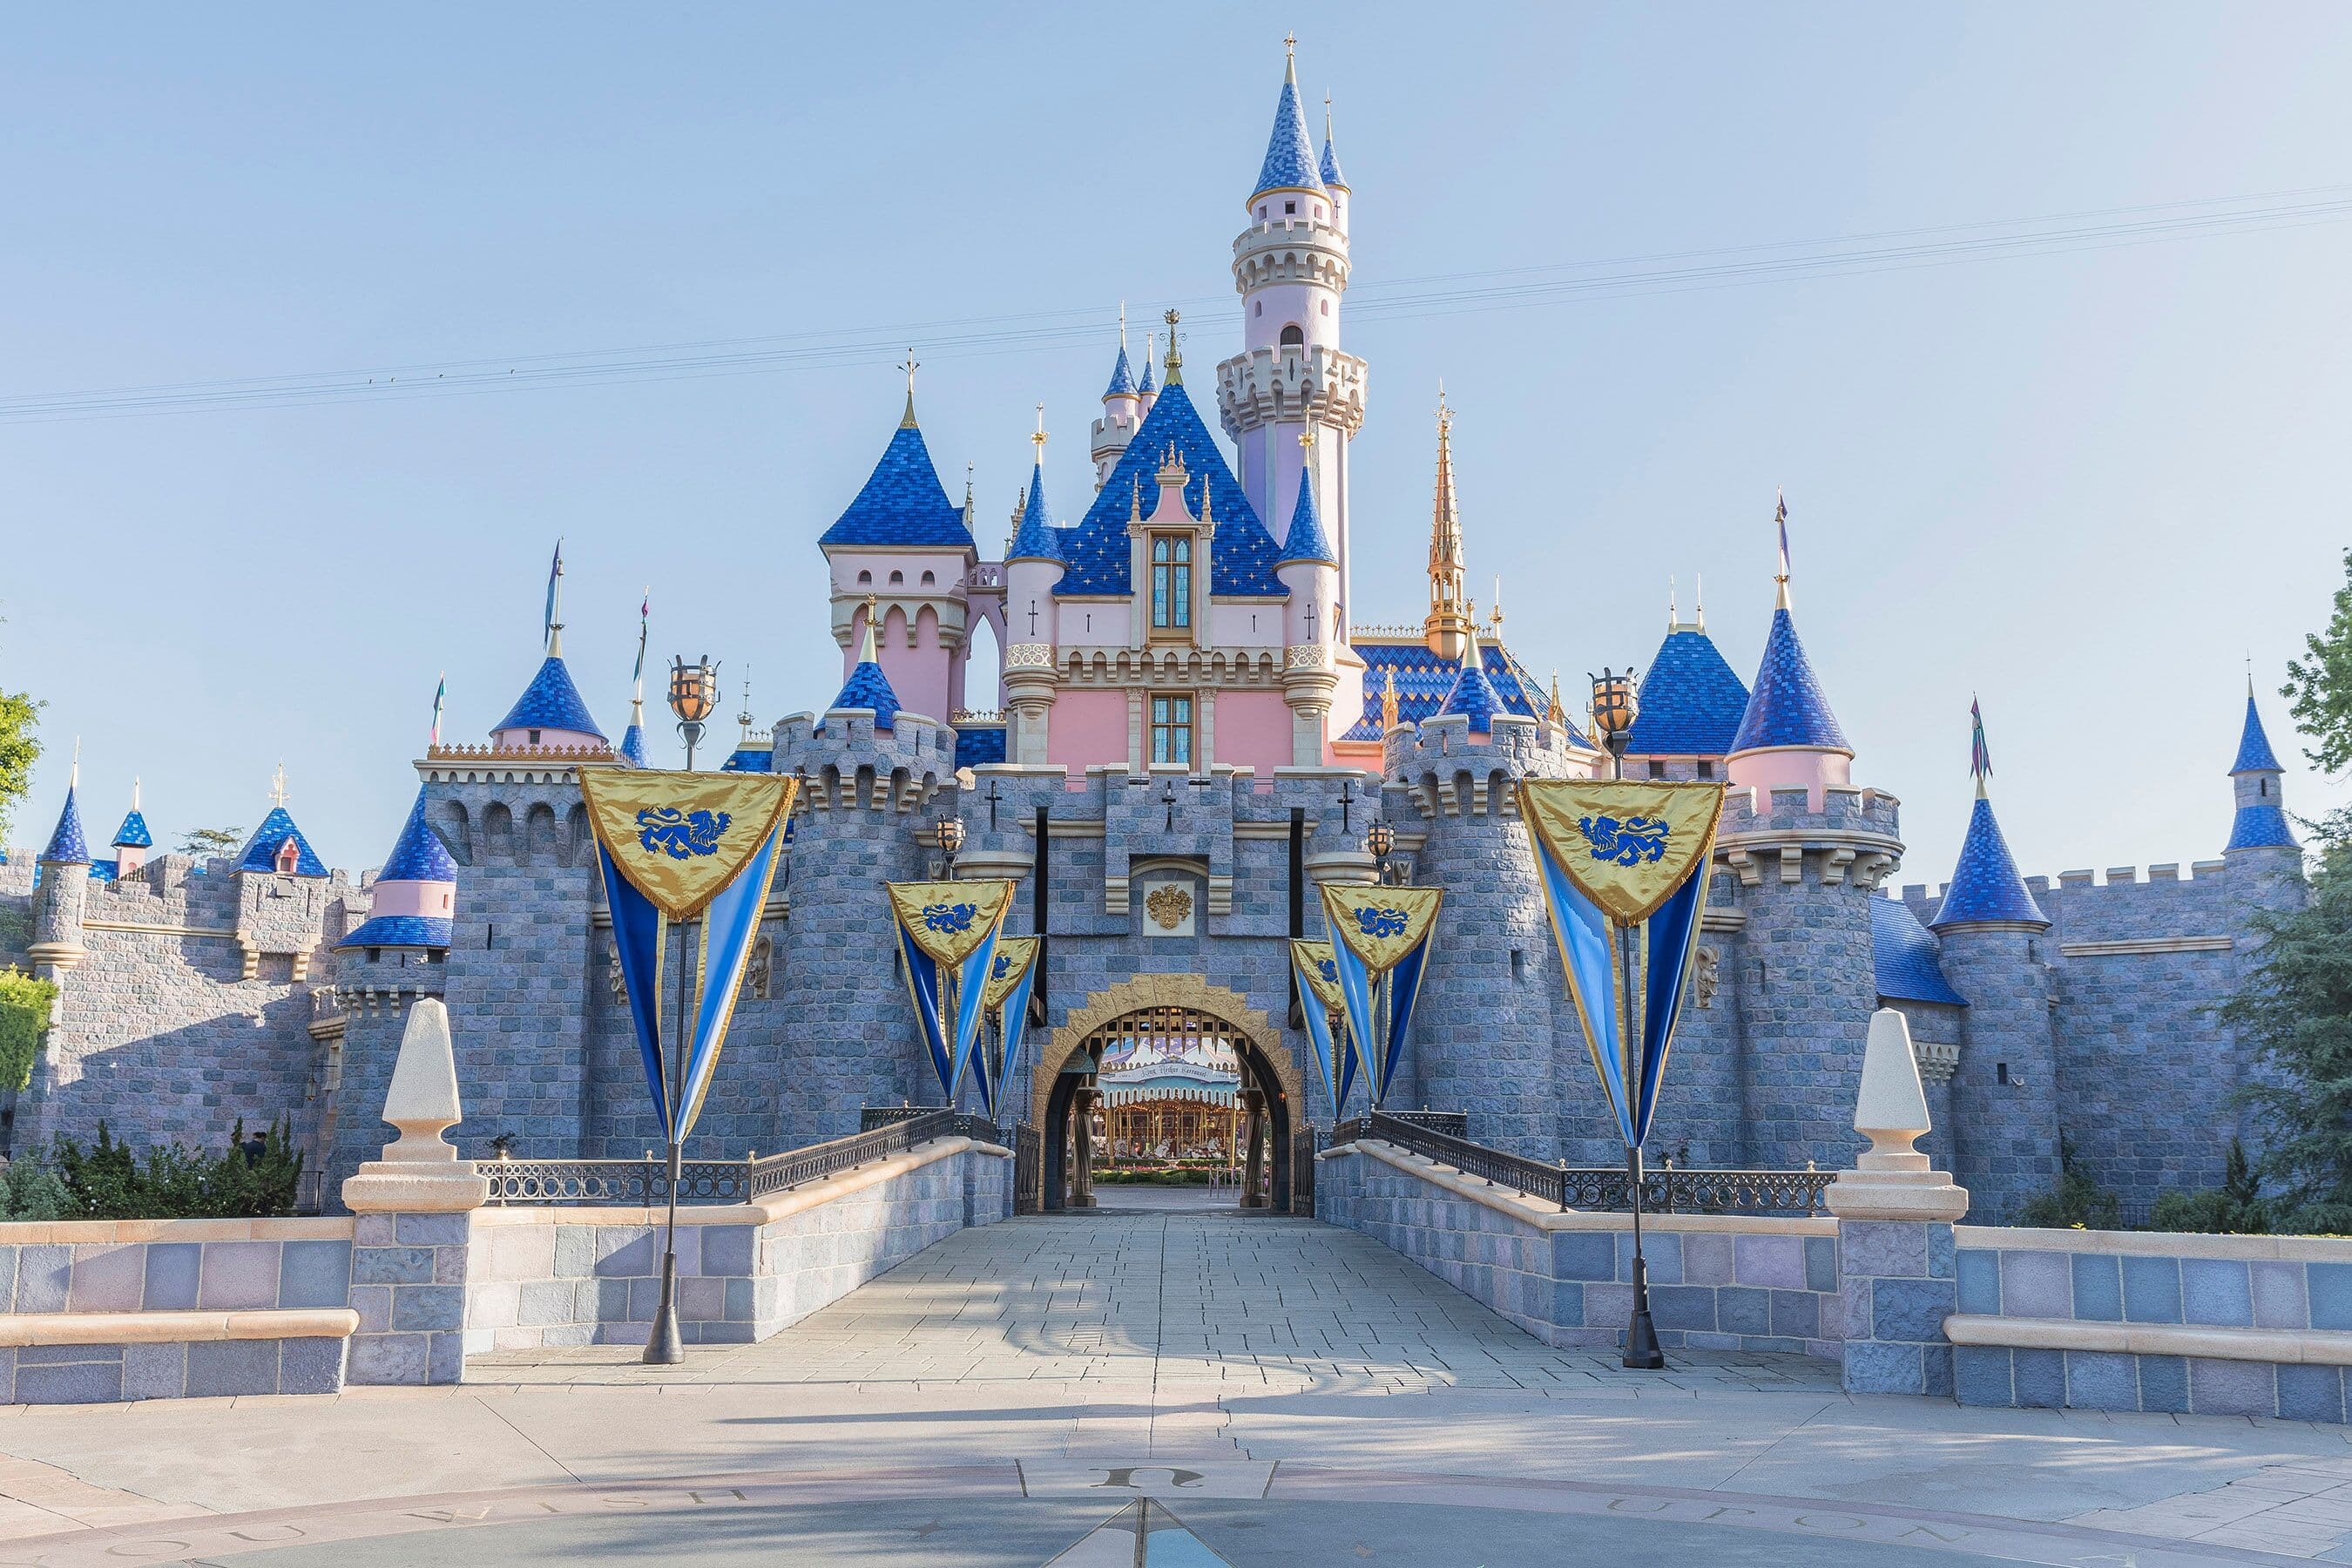 A more colorful Sleeping Beauty's Castle debuts at Disneland in spring 2019